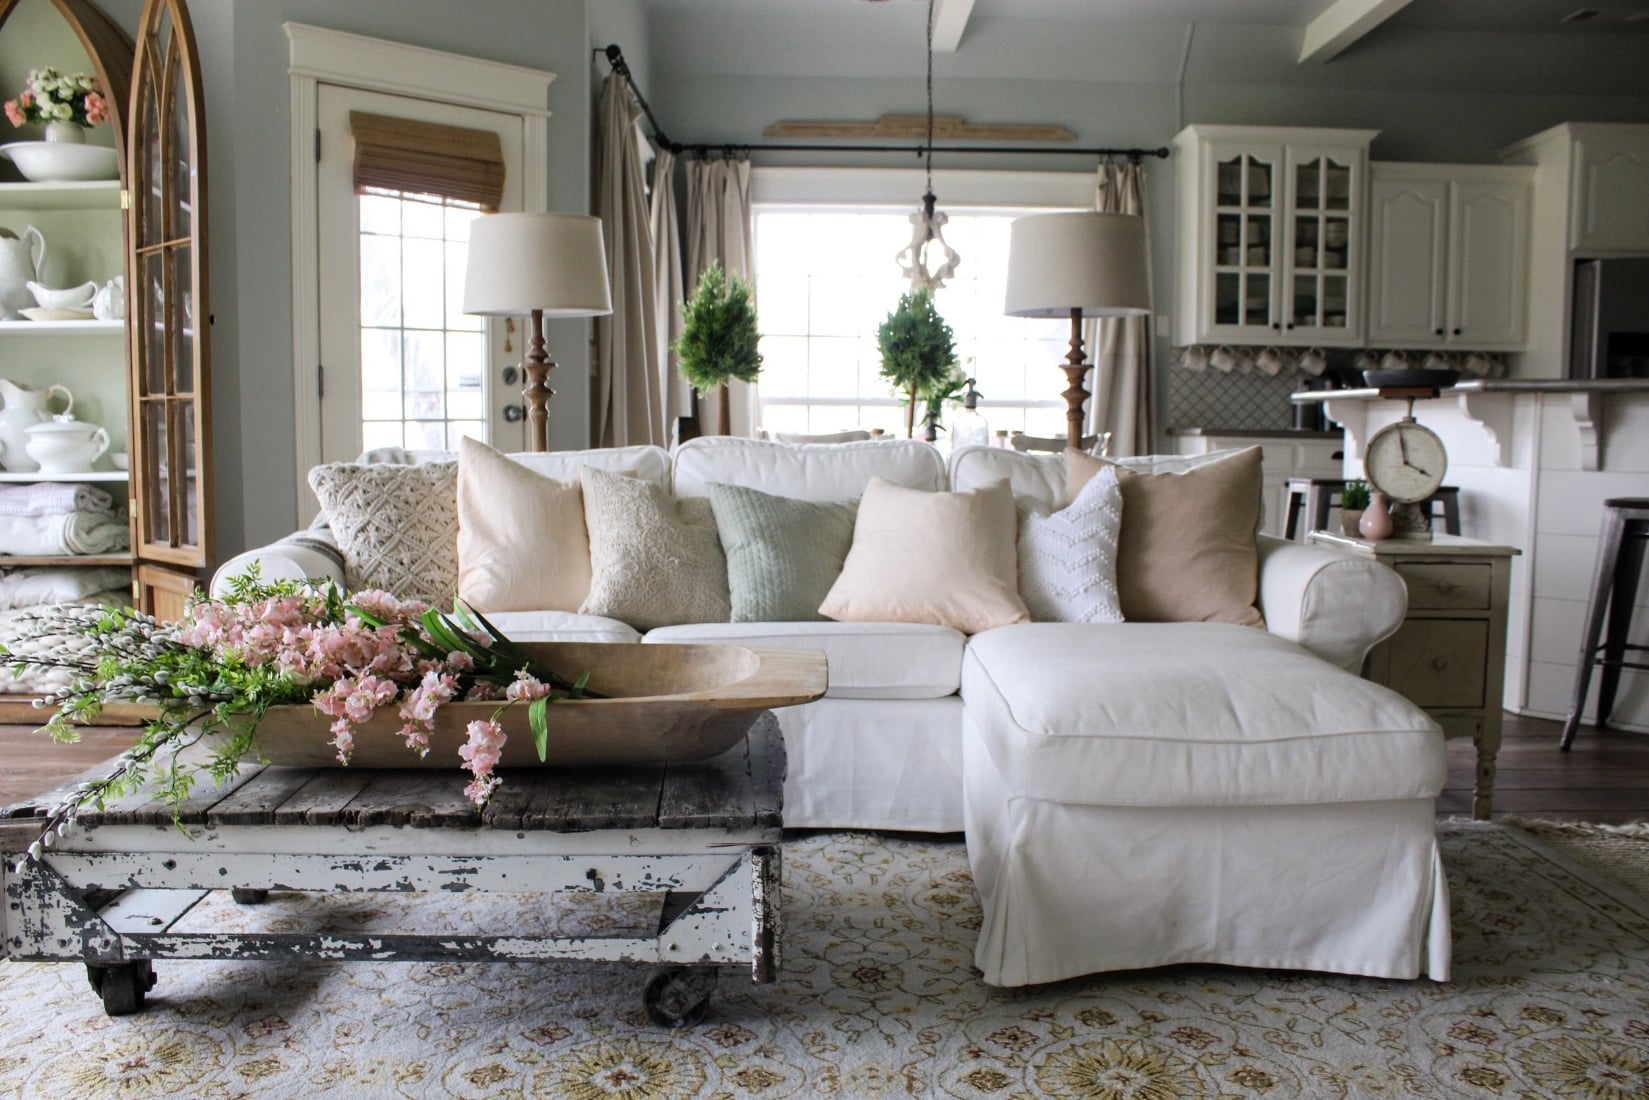 Slipcovered Sofa: Our 8 Top Choices for a Stylish Home